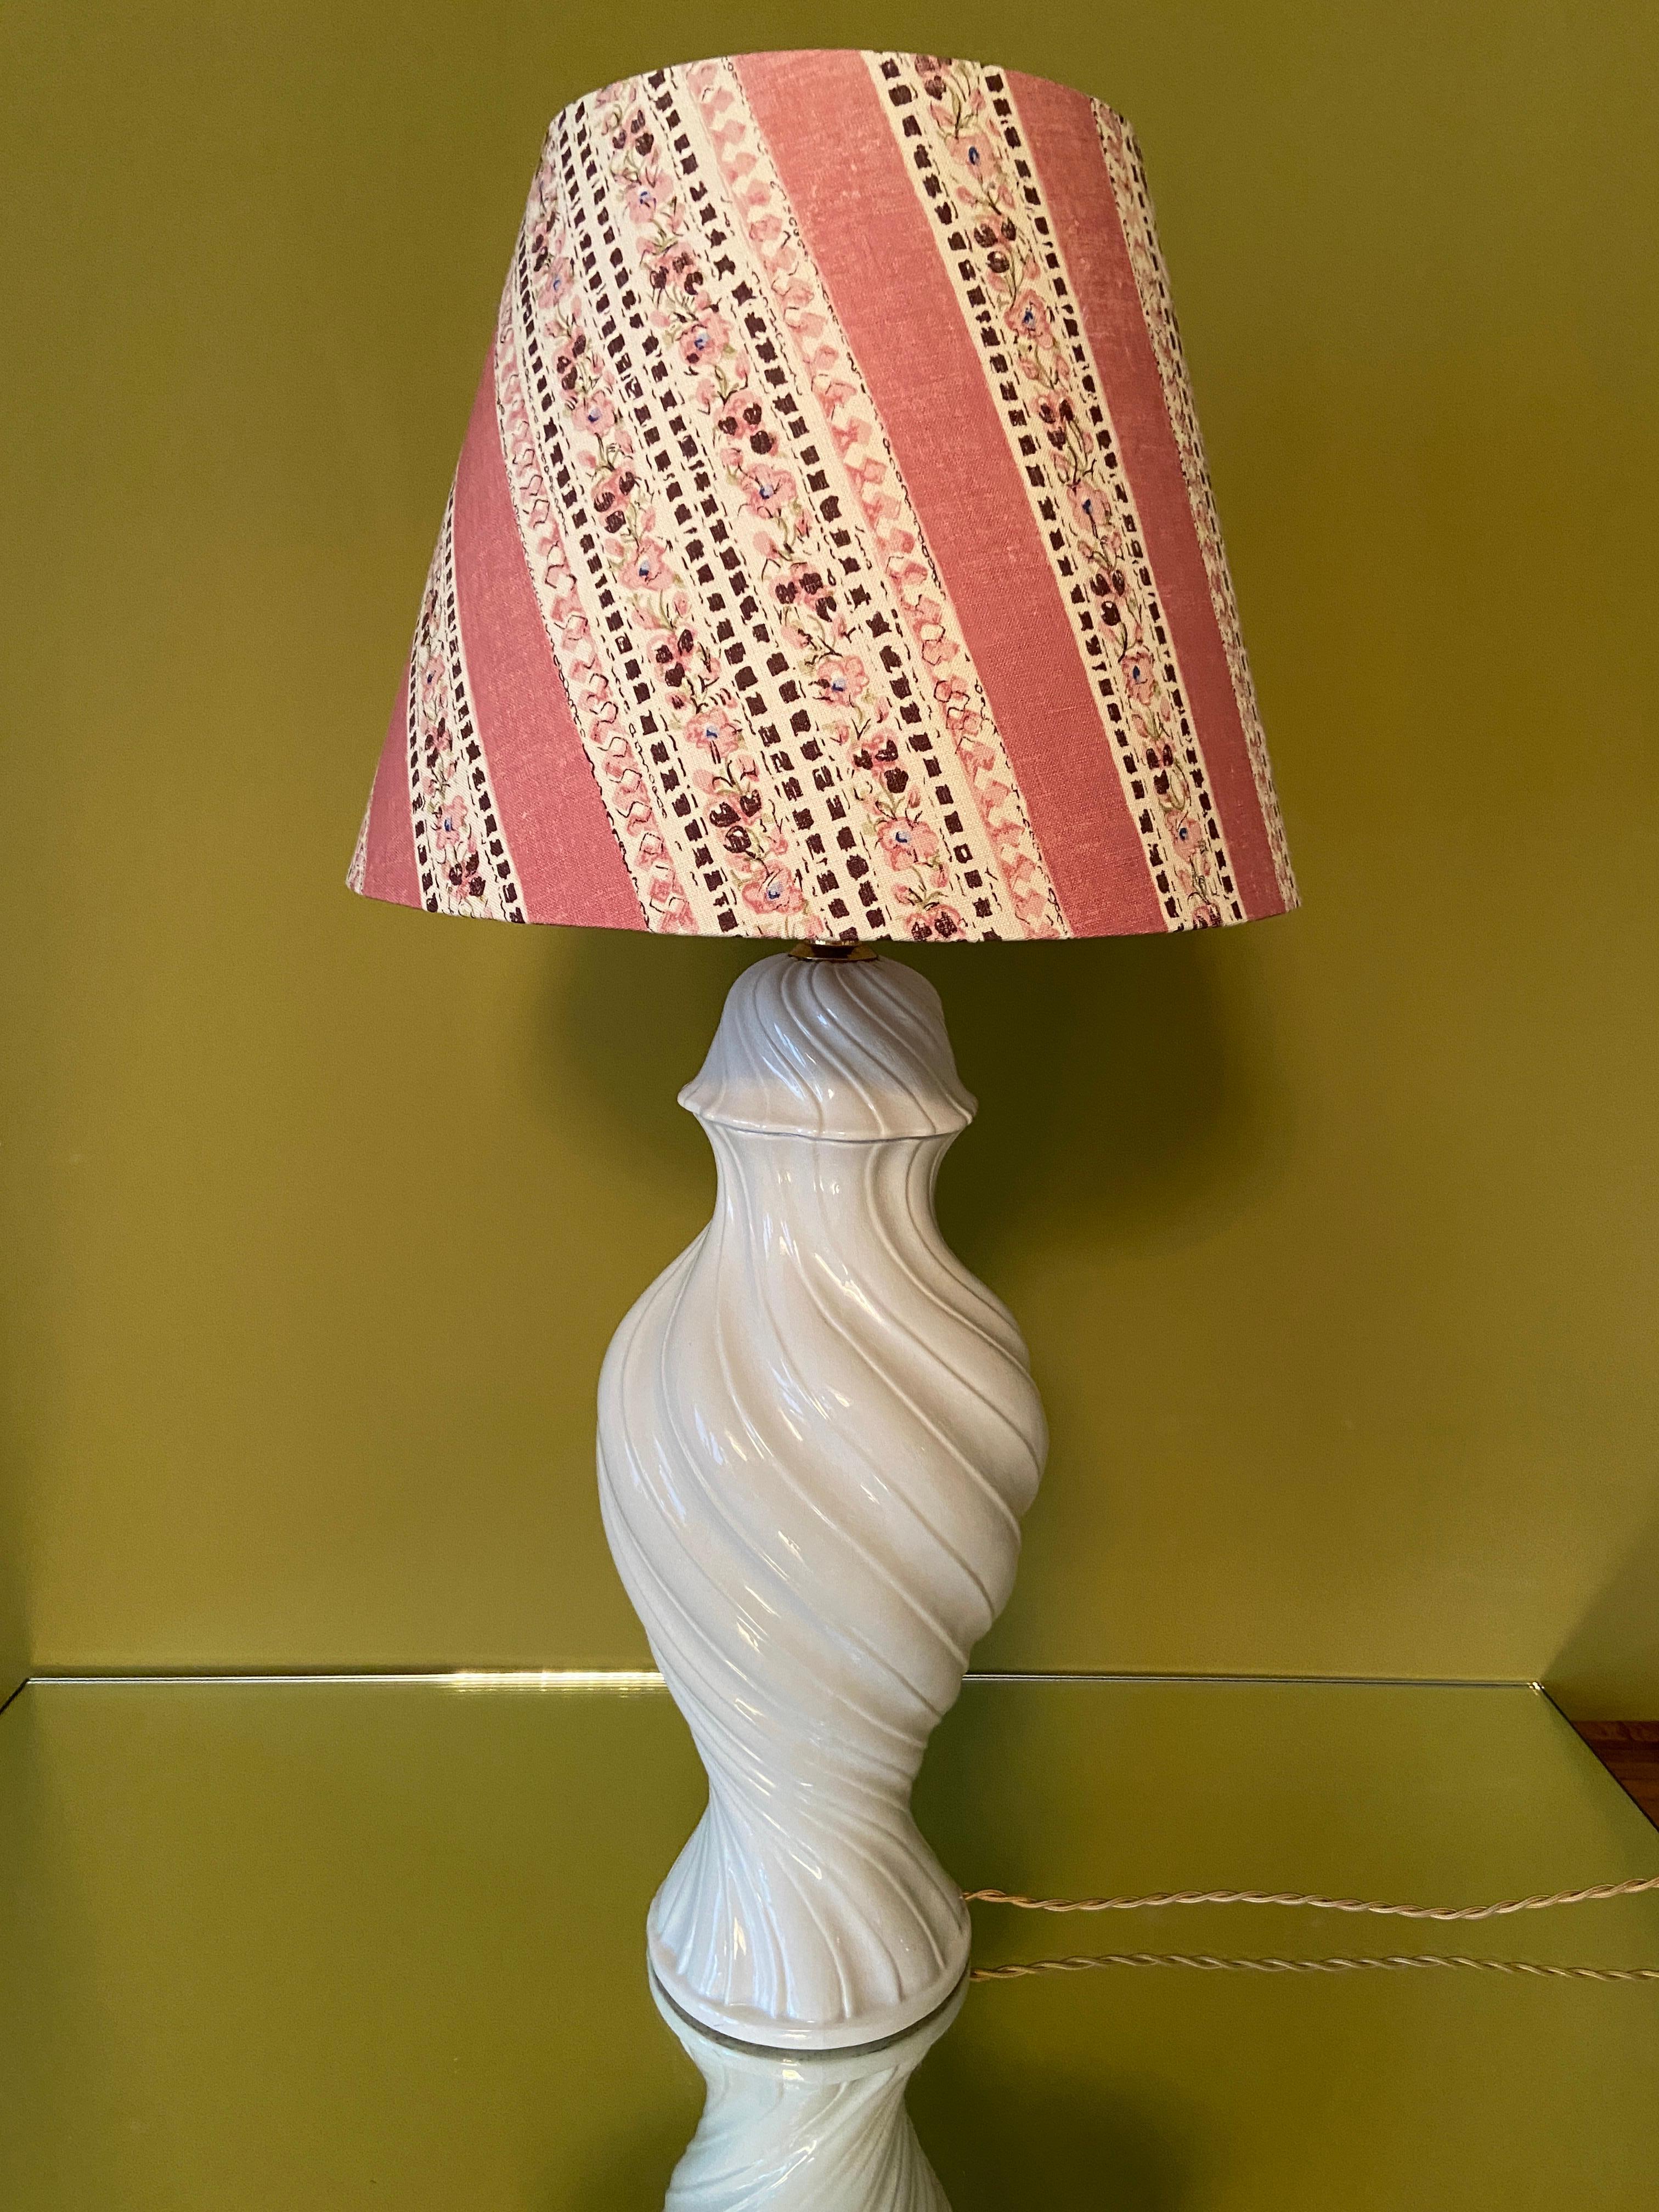 Italian Vintage Ceramic Table Lamp with Customized Shade, Italy, 20th Century For Sale